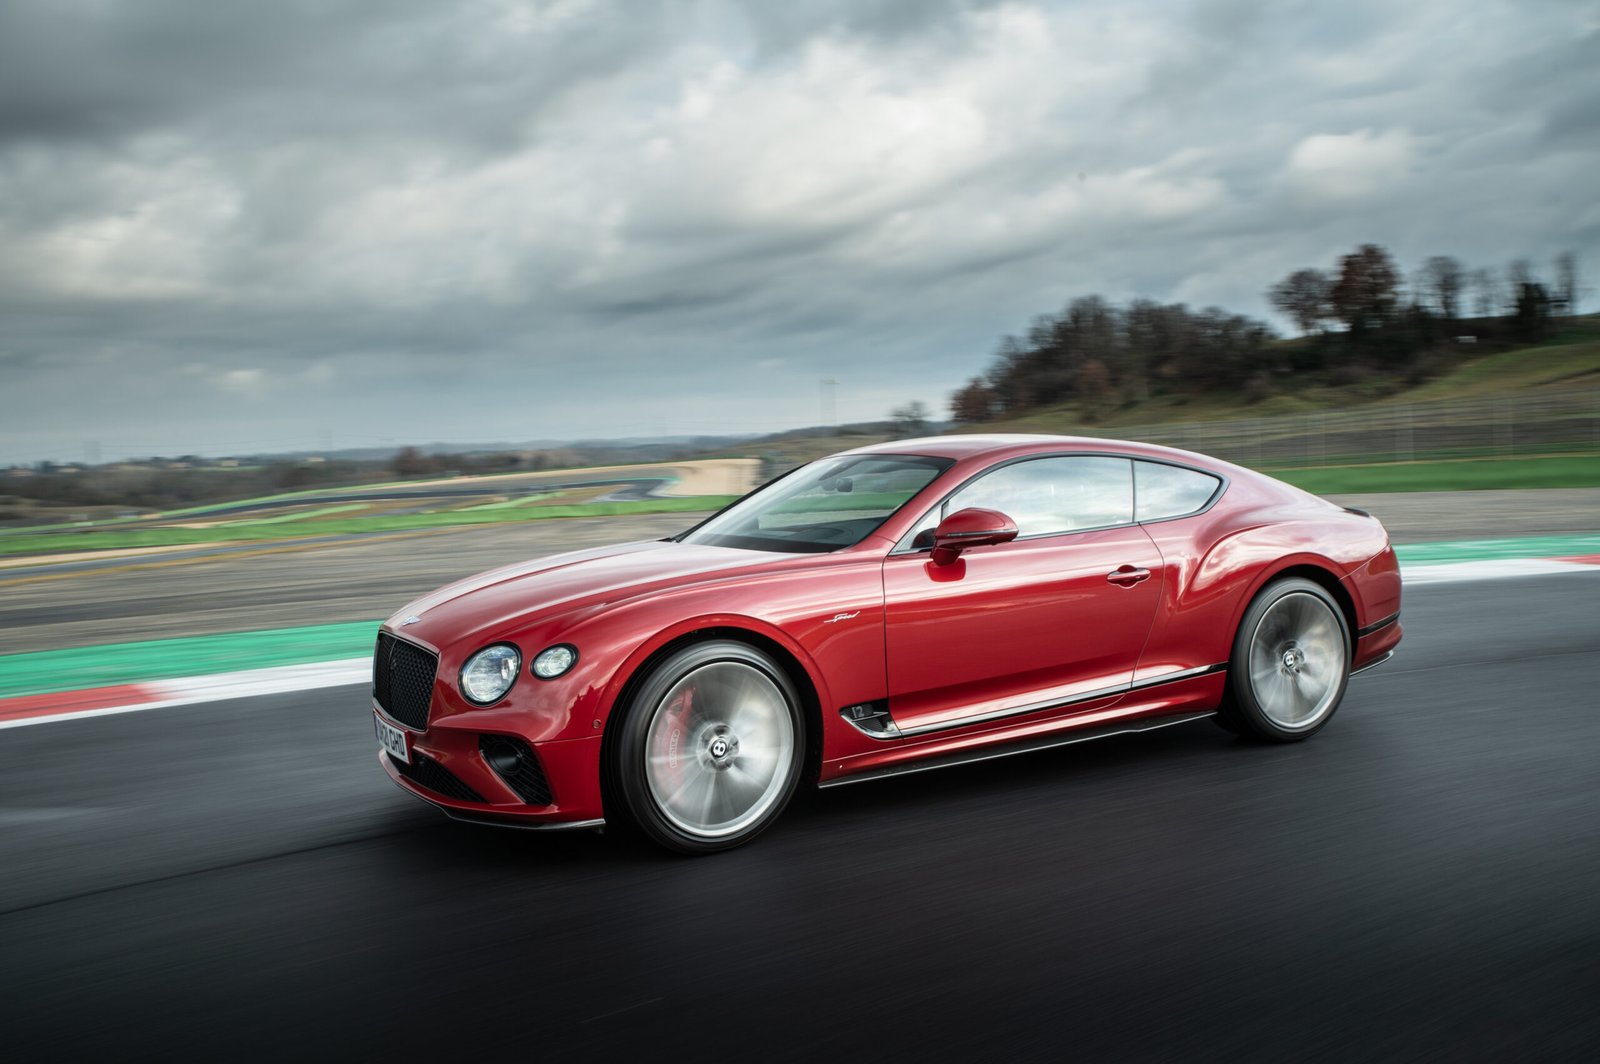 BENTLEY CONTINENTAL GT SPEED NAMED CLASSIC OF THE FUTURE BY THE ‘MOTOR KLASSIK AWARDS 2022’